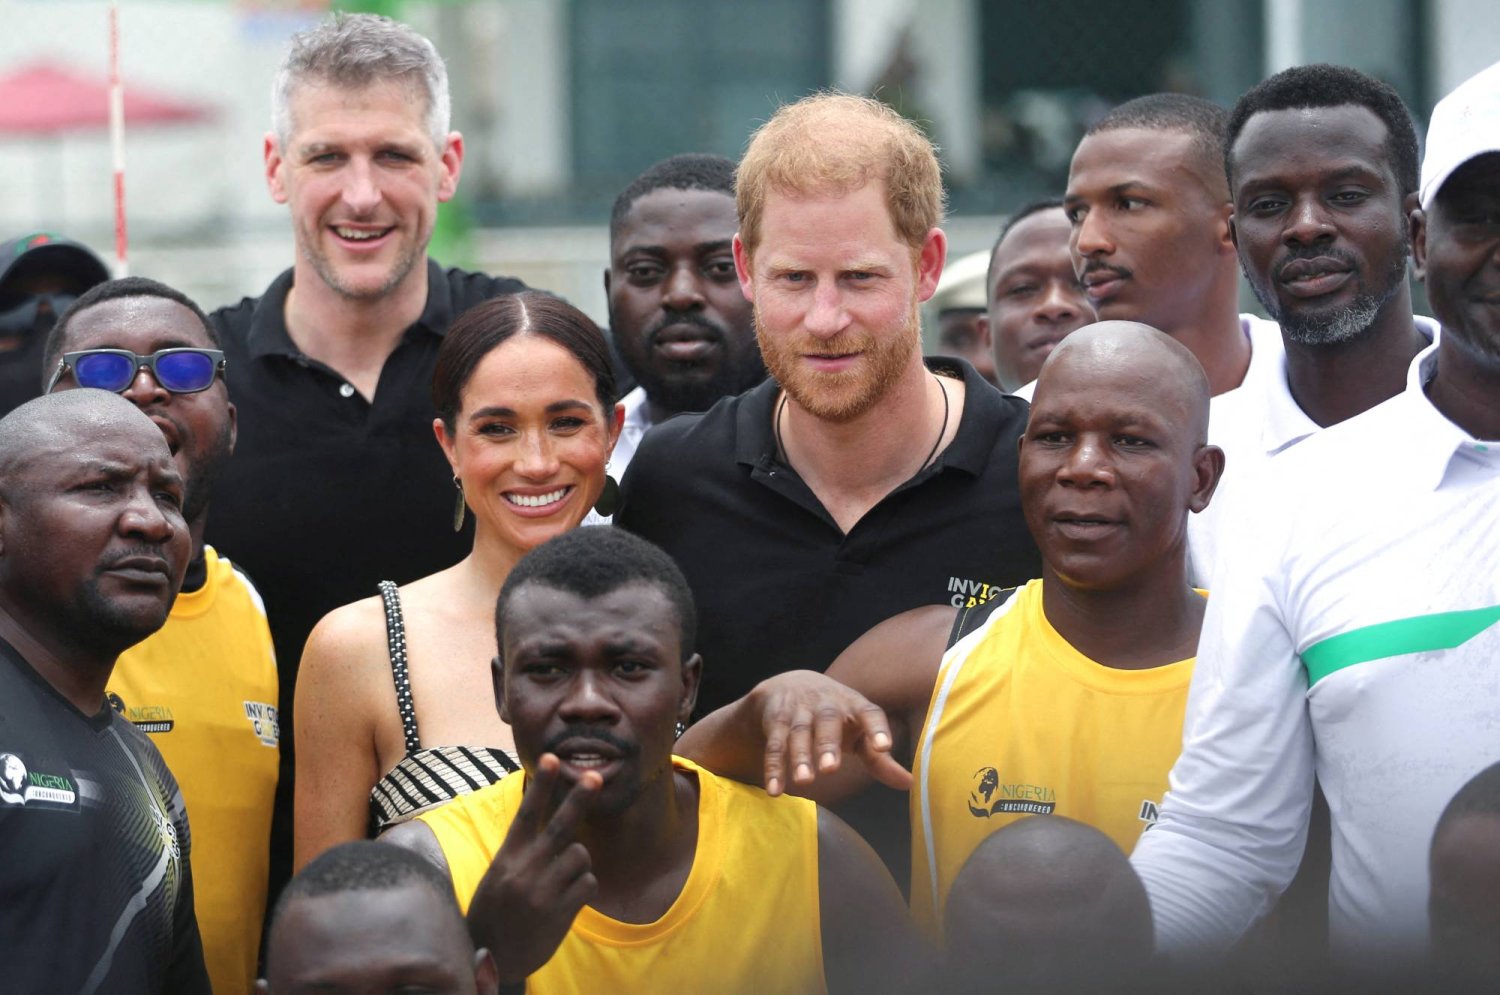 Britain's Prince Harry, Duke of Sussex and his wife Meghan, Duchess of Sussex pose on the day they attend a volleyball match played with wounded army veterans, at the Nigerian army officers' mess in Abuja, Nigeria May 11, 2024. REUTERS/Akintunde Akinleye